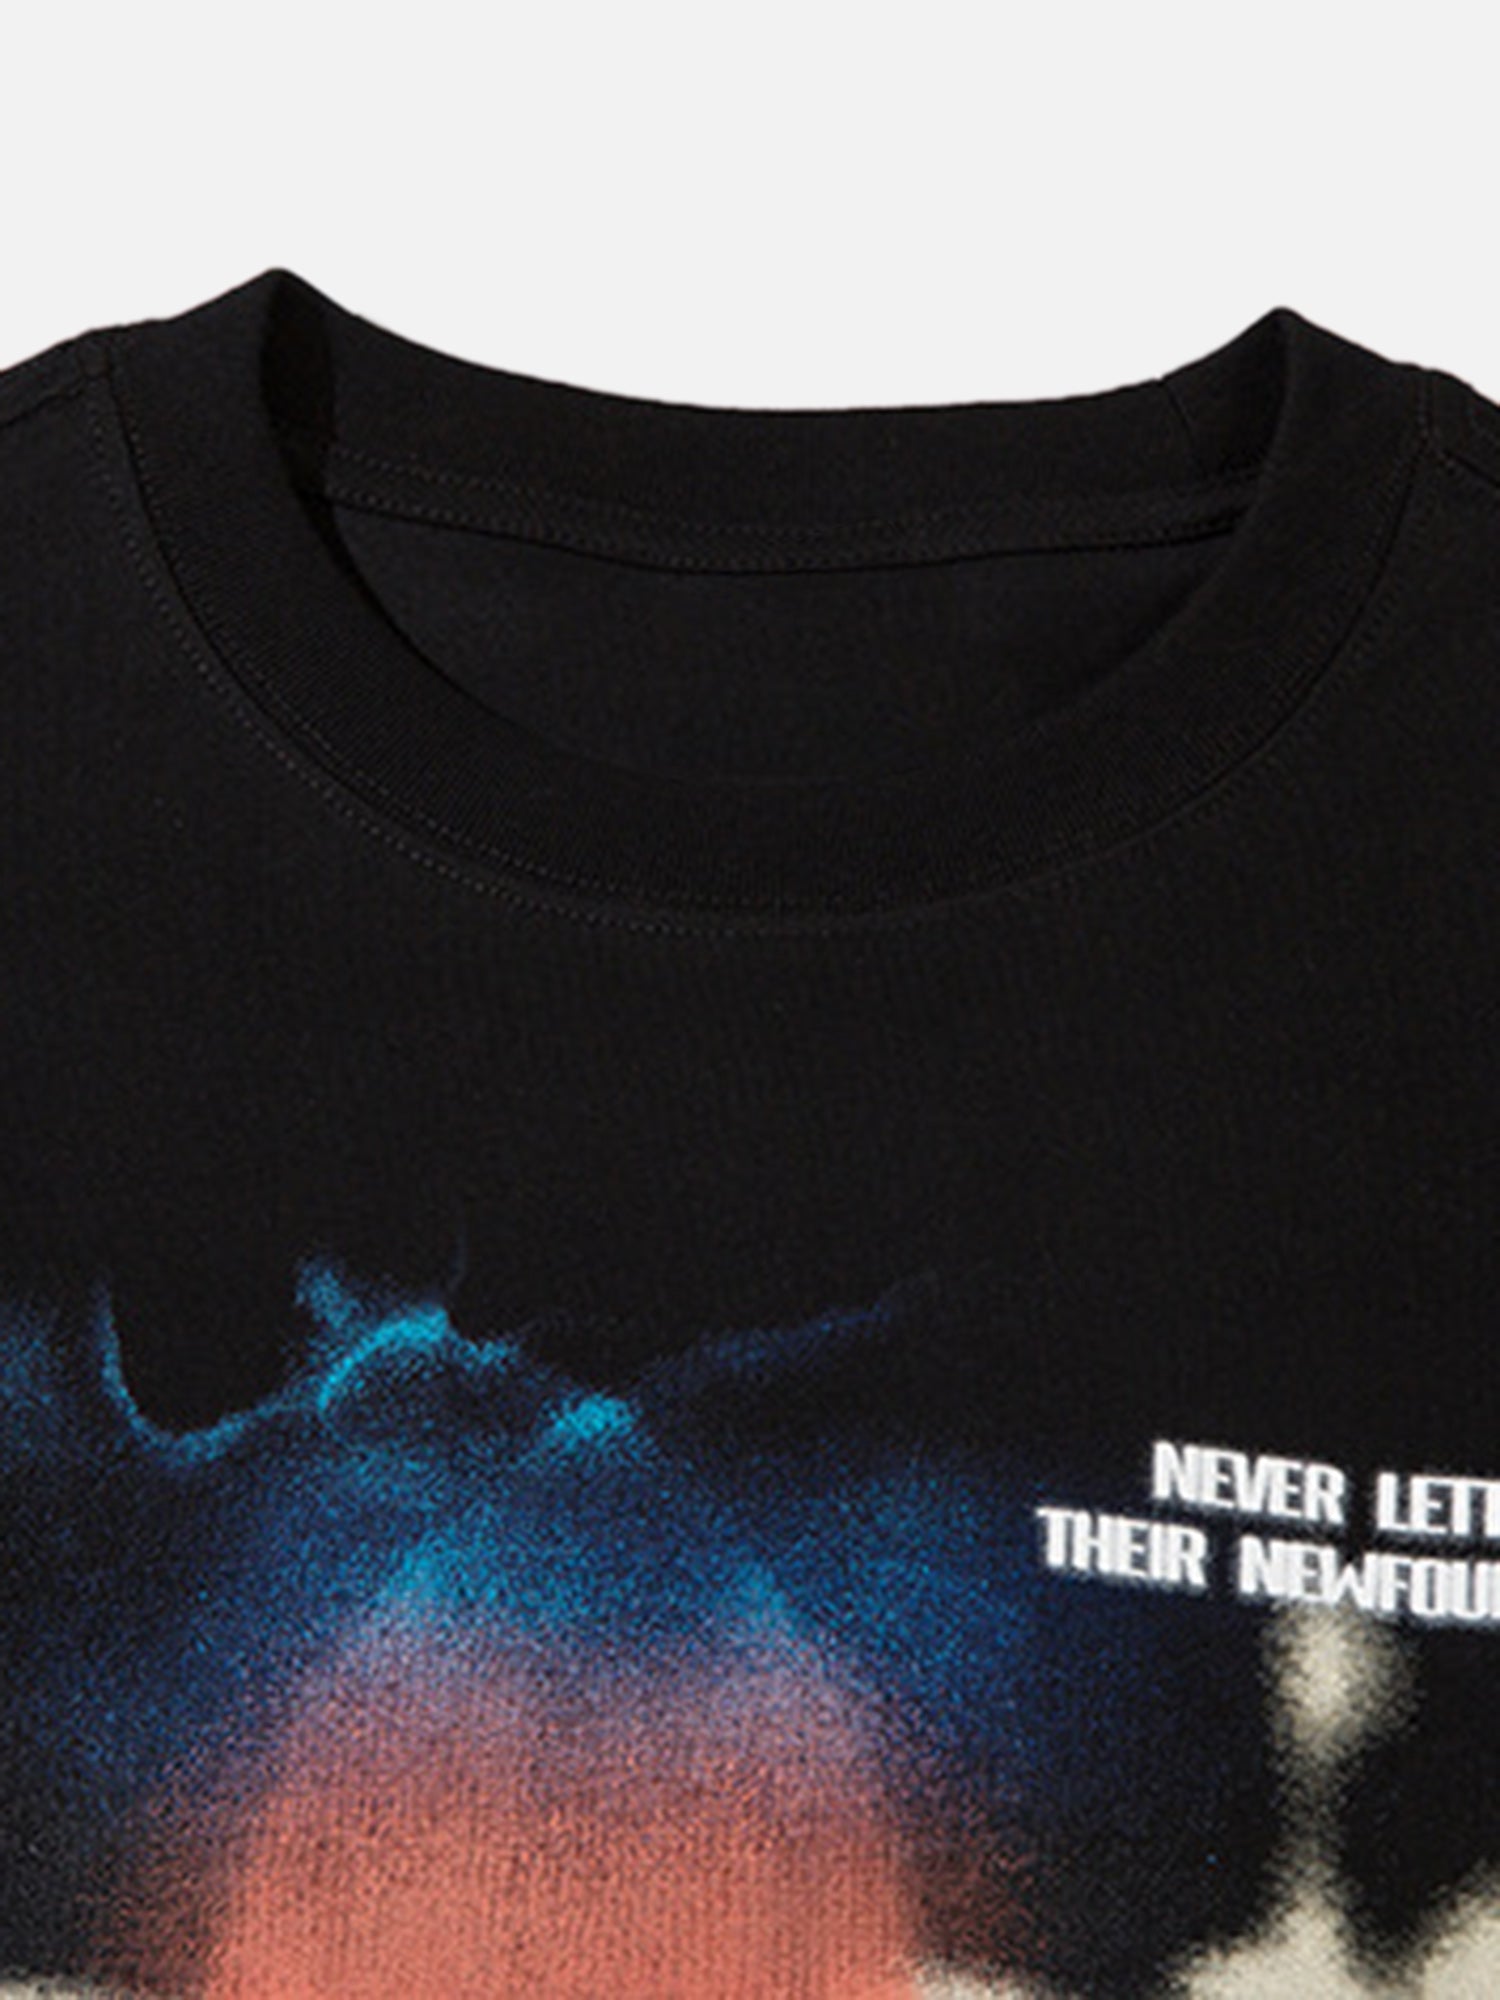 Vintage Personalized Thermal Imaging T-shirt